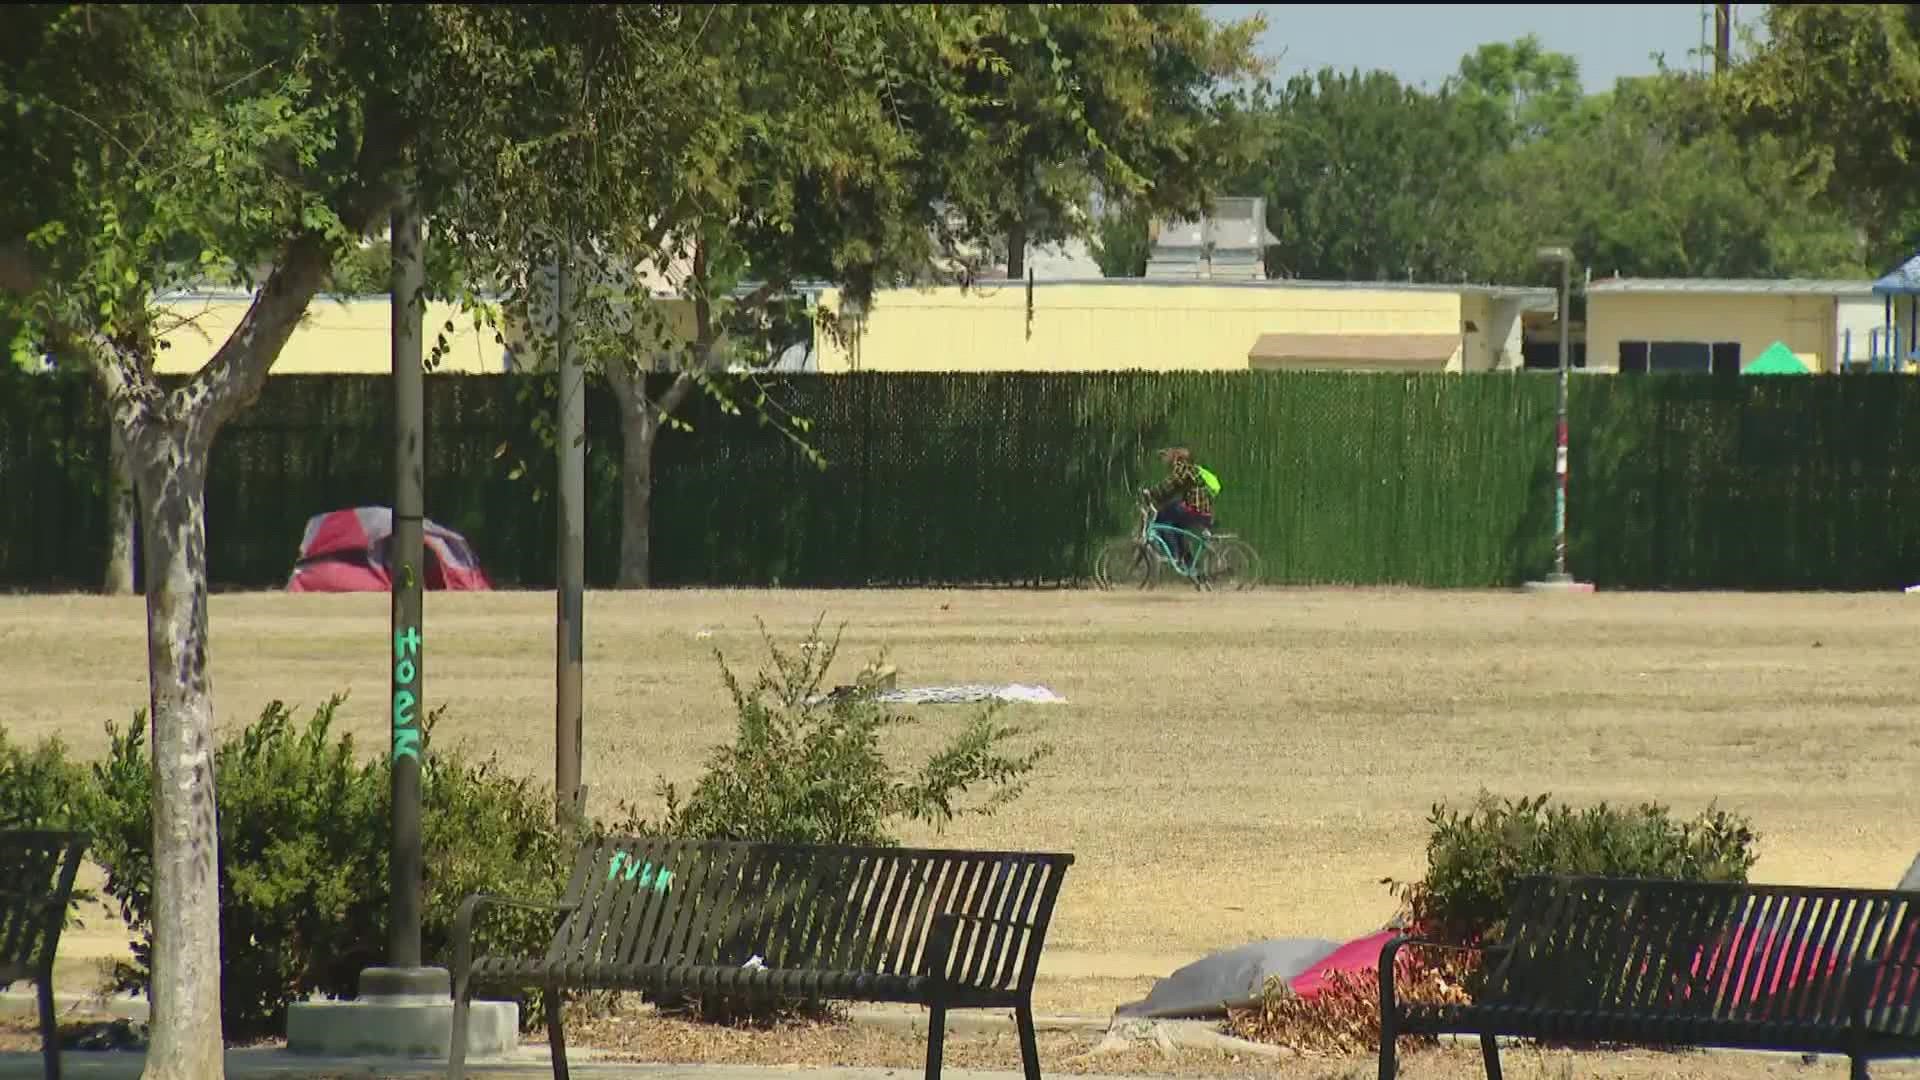 Council member John McCann told CBS 8 he will propose a ban on encampments within 500 feet of schools.